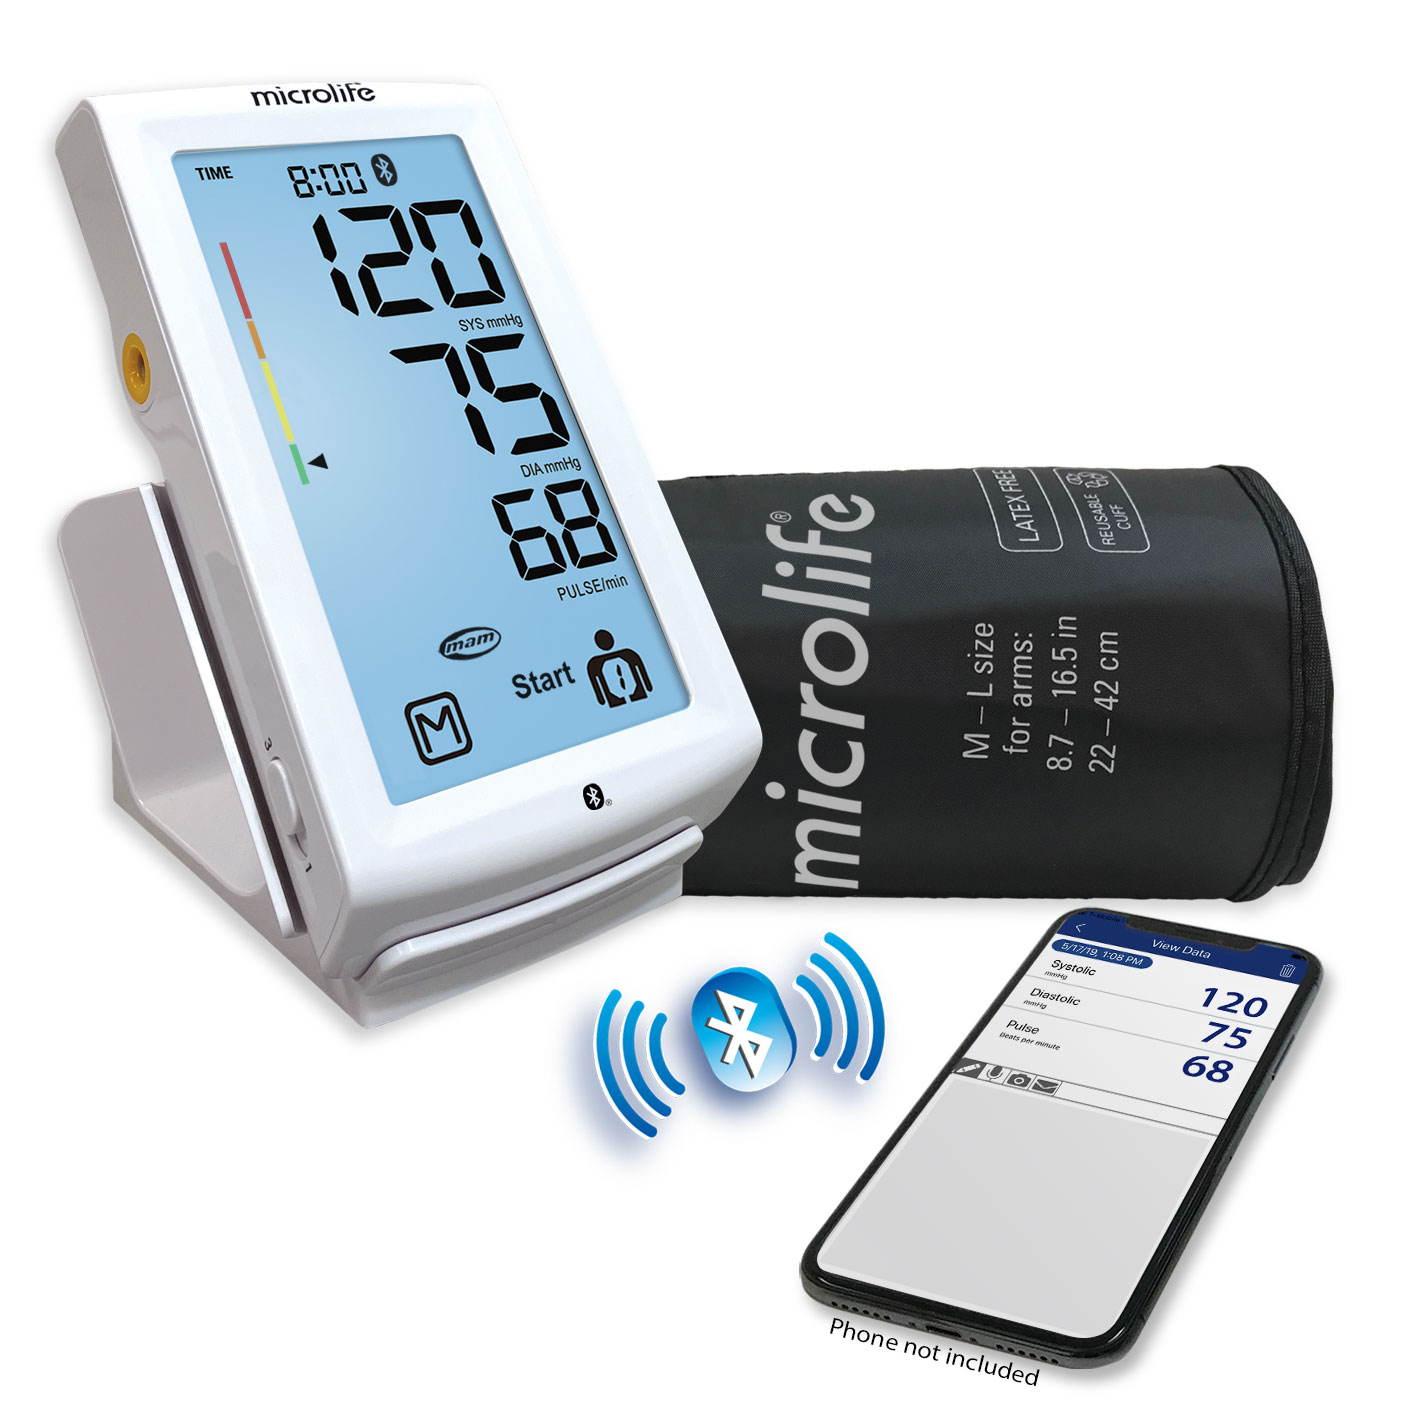 https://microlifeusa.com/wp-content/uploads/2021/11/5-GT1-6F-3-4-in-stand-with-phone-112221-1.jpg